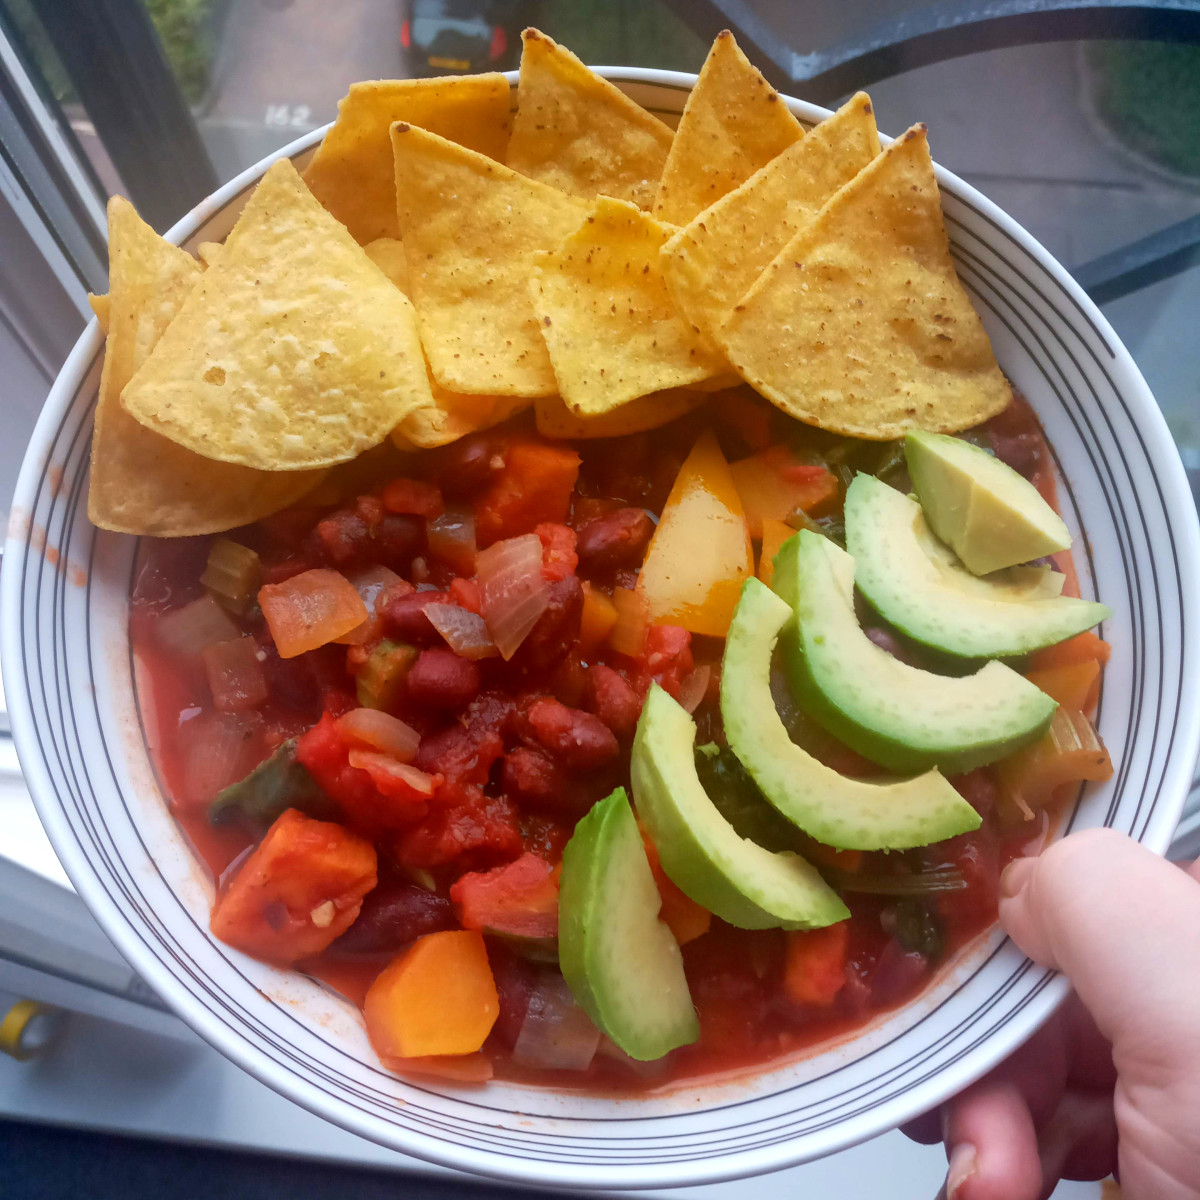 A homemade chilli packed full of beans and vegetables